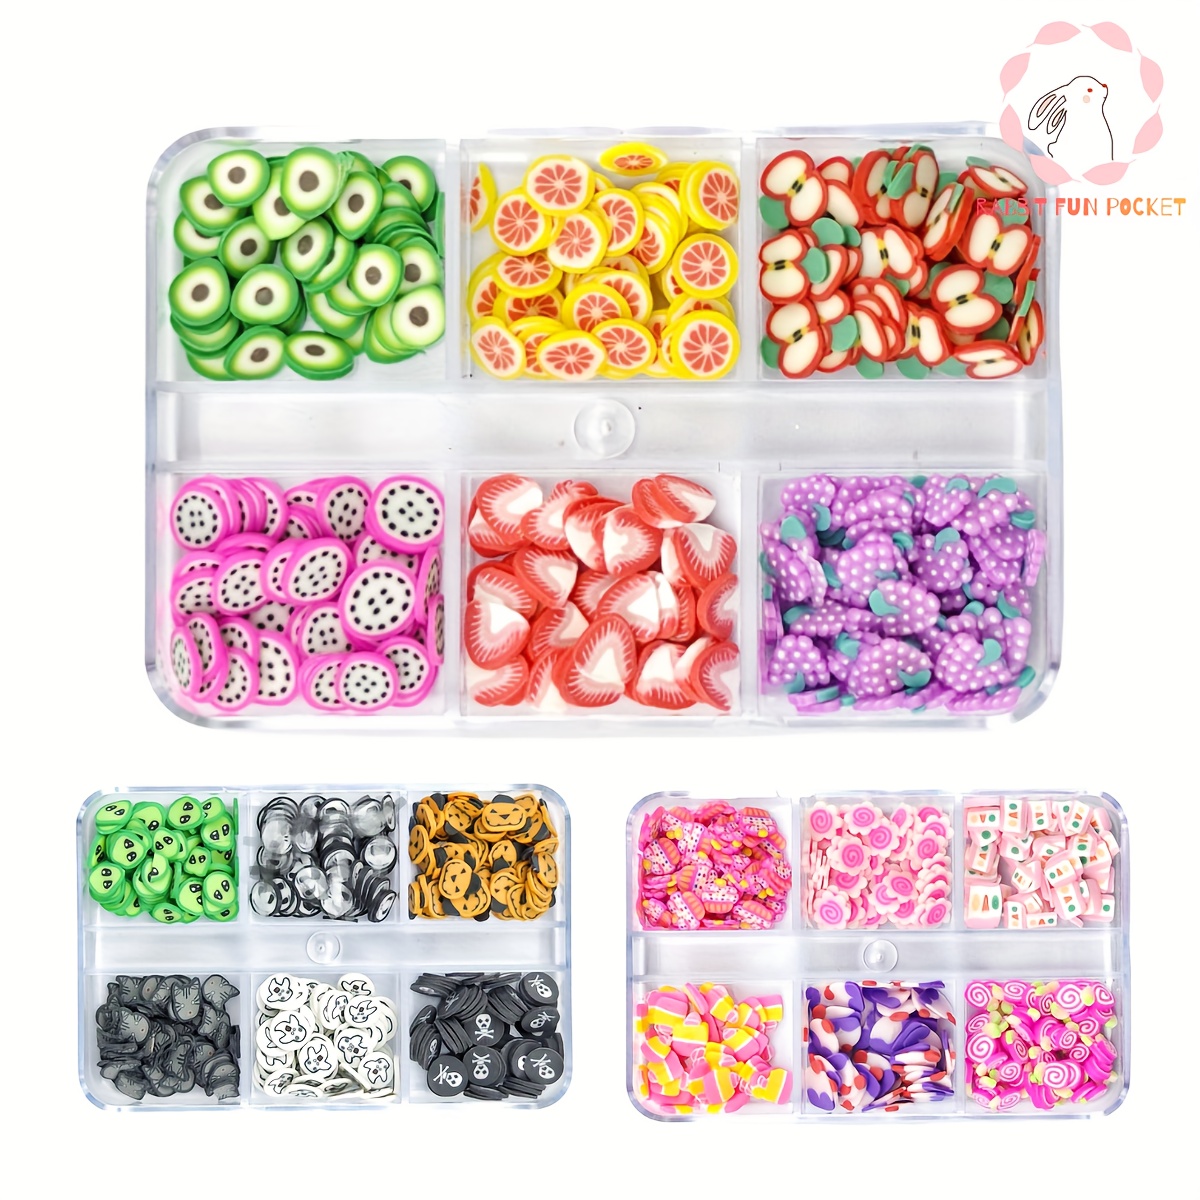 70 Pieces Halloween Themed Resin Fillers, Alloy Resin Supplies Resin  Accessories, Resin Filling for Resin Jewelry Making - Golden